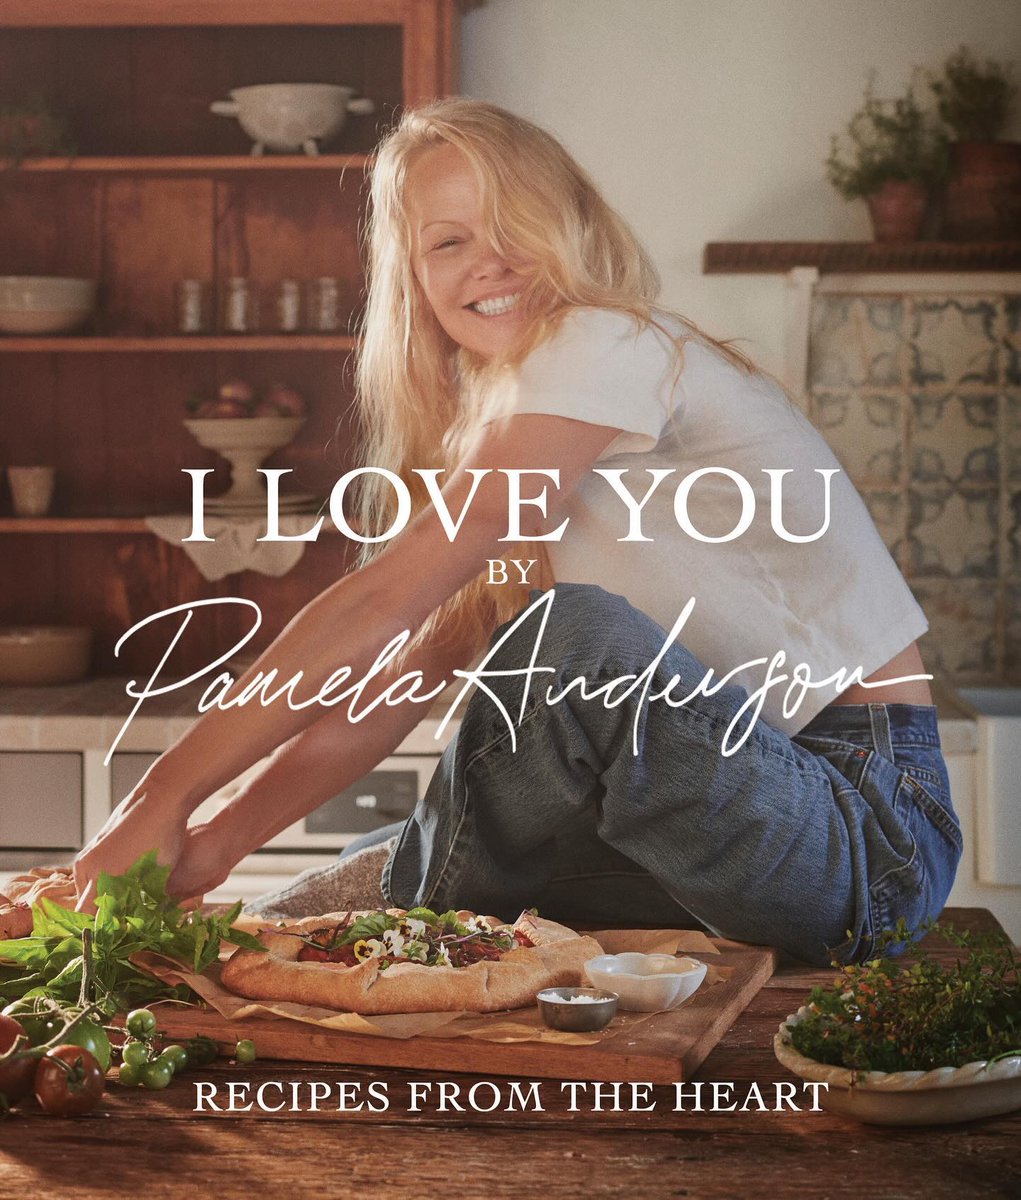 Embrace the power of plant-based living with .@PamelaAnderson's upcoming cookbook, 'I Love You: Recipes from the Heart'. Read more here: tinyurl.com/9hd89jb9 #PlantBased #CookingWithLove #Cookbook